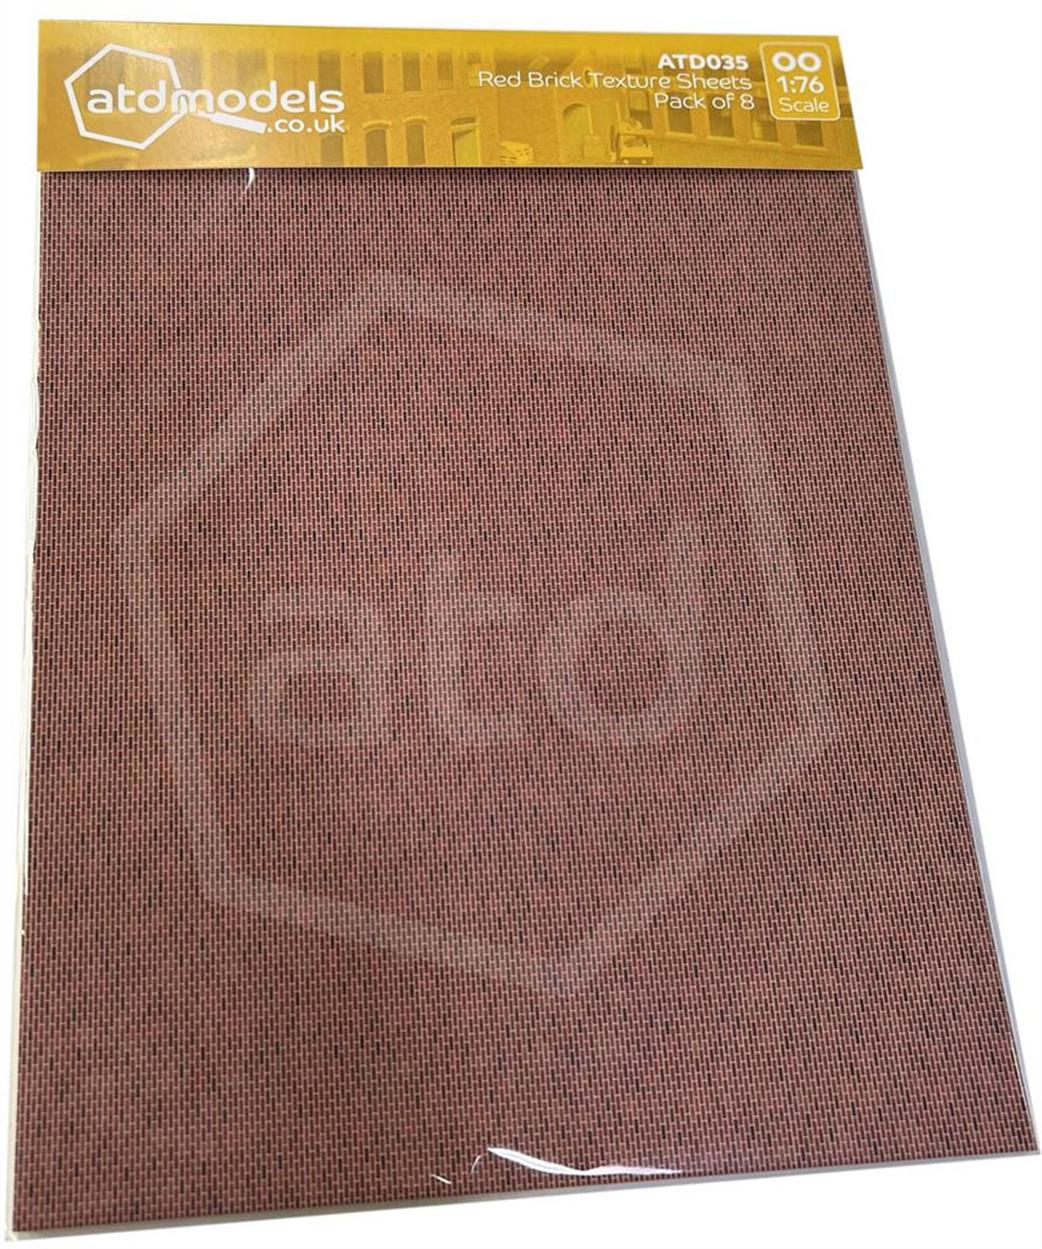 ATD Models OO ATD035 Red Brick Textured Card Builders Pack 8xA4 Sheets